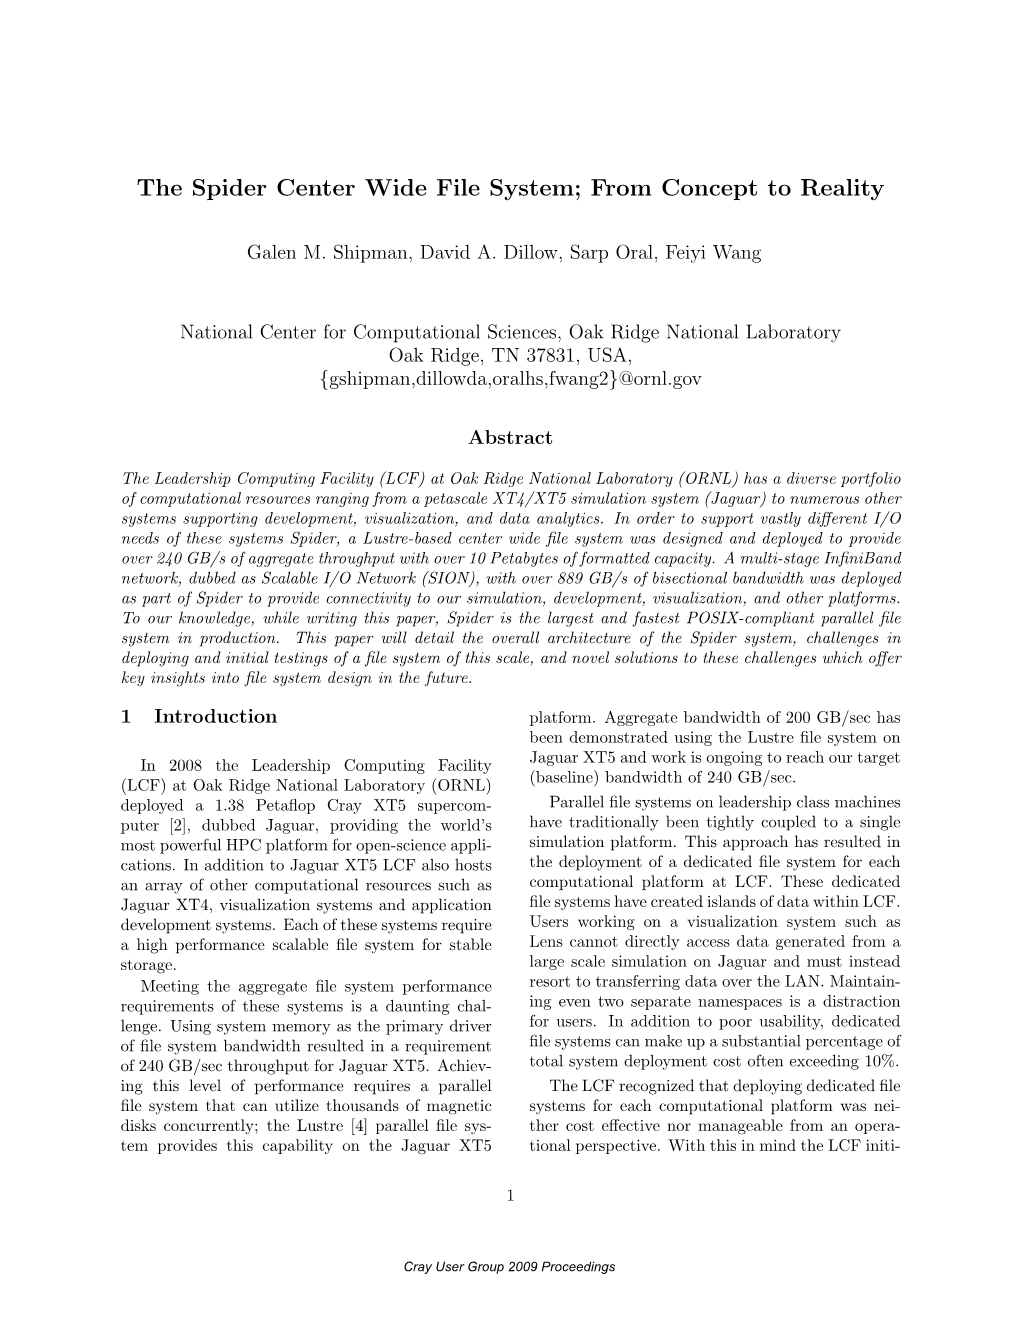 The Spider Center Wide File System; from Concept to Reality